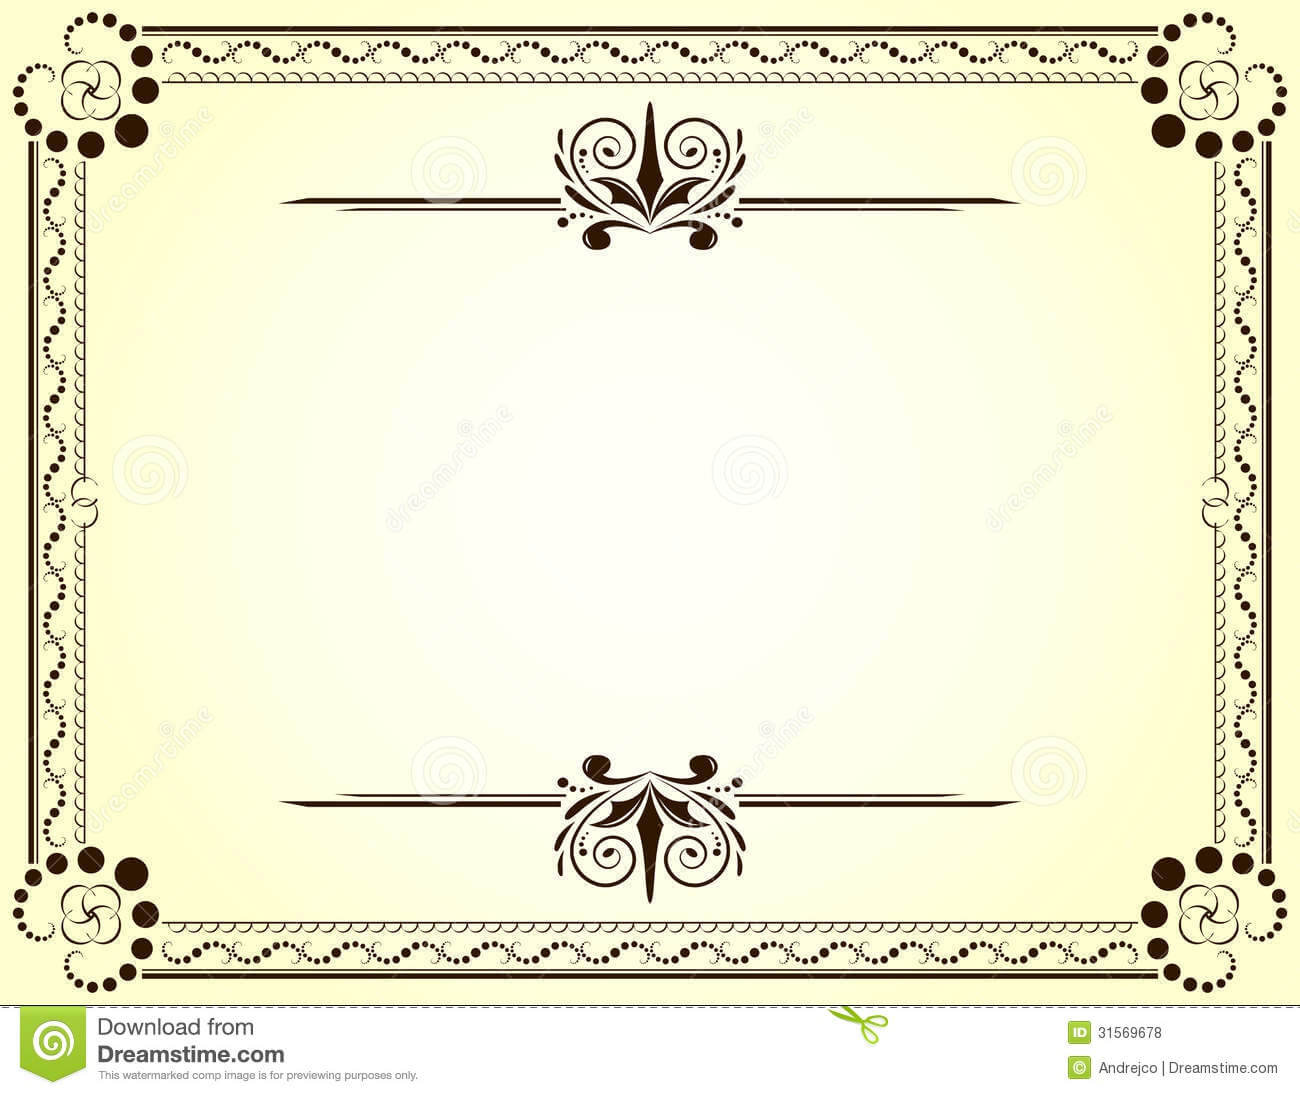 Certificate Stock Vector. Illustration Of Vignette, Frame Pertaining To Blank Certificate Templates Free Download